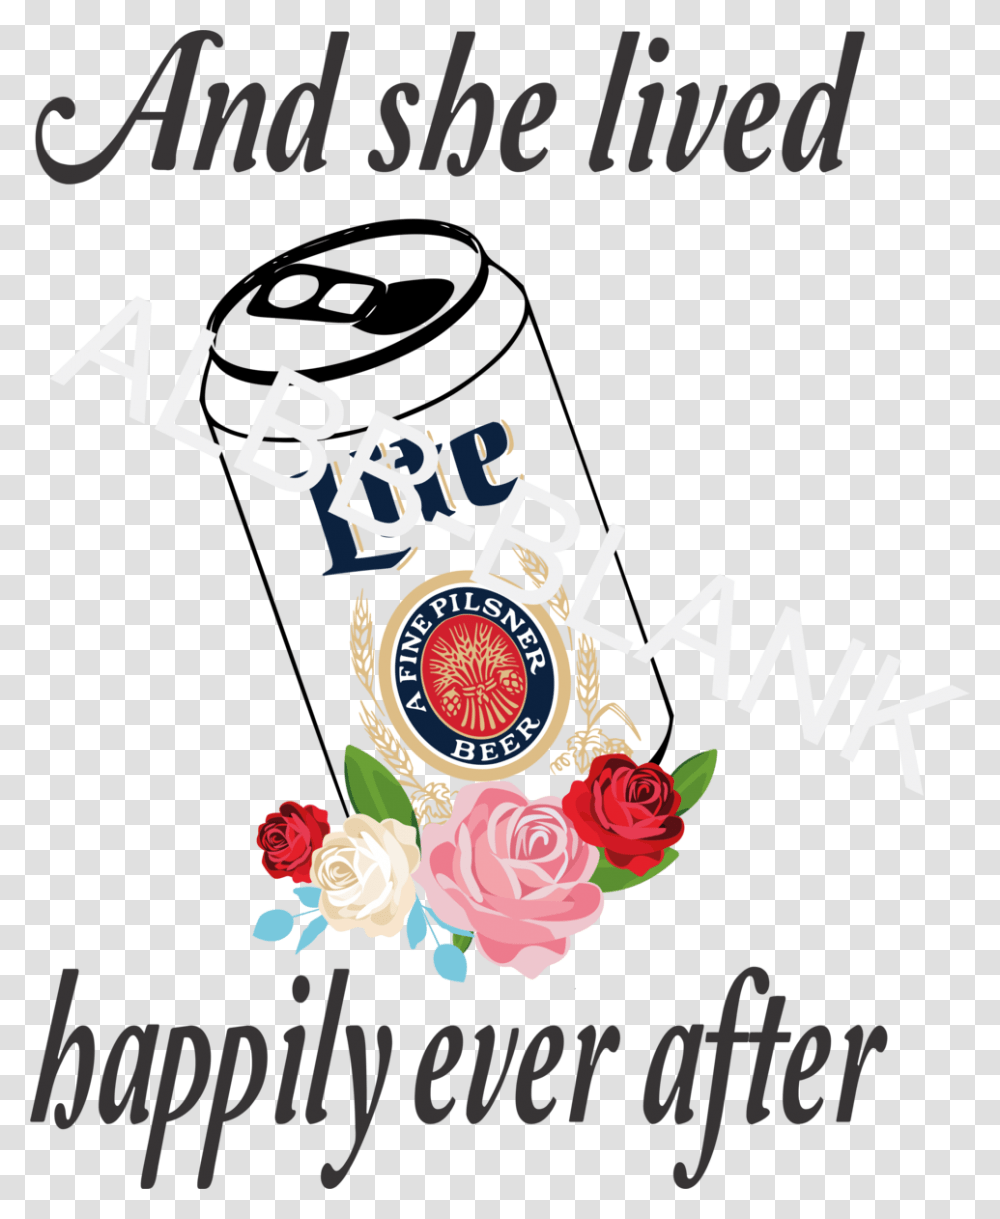 And She Lived Happily Ever After Albb Blanks, Logo, Trademark Transparent Png